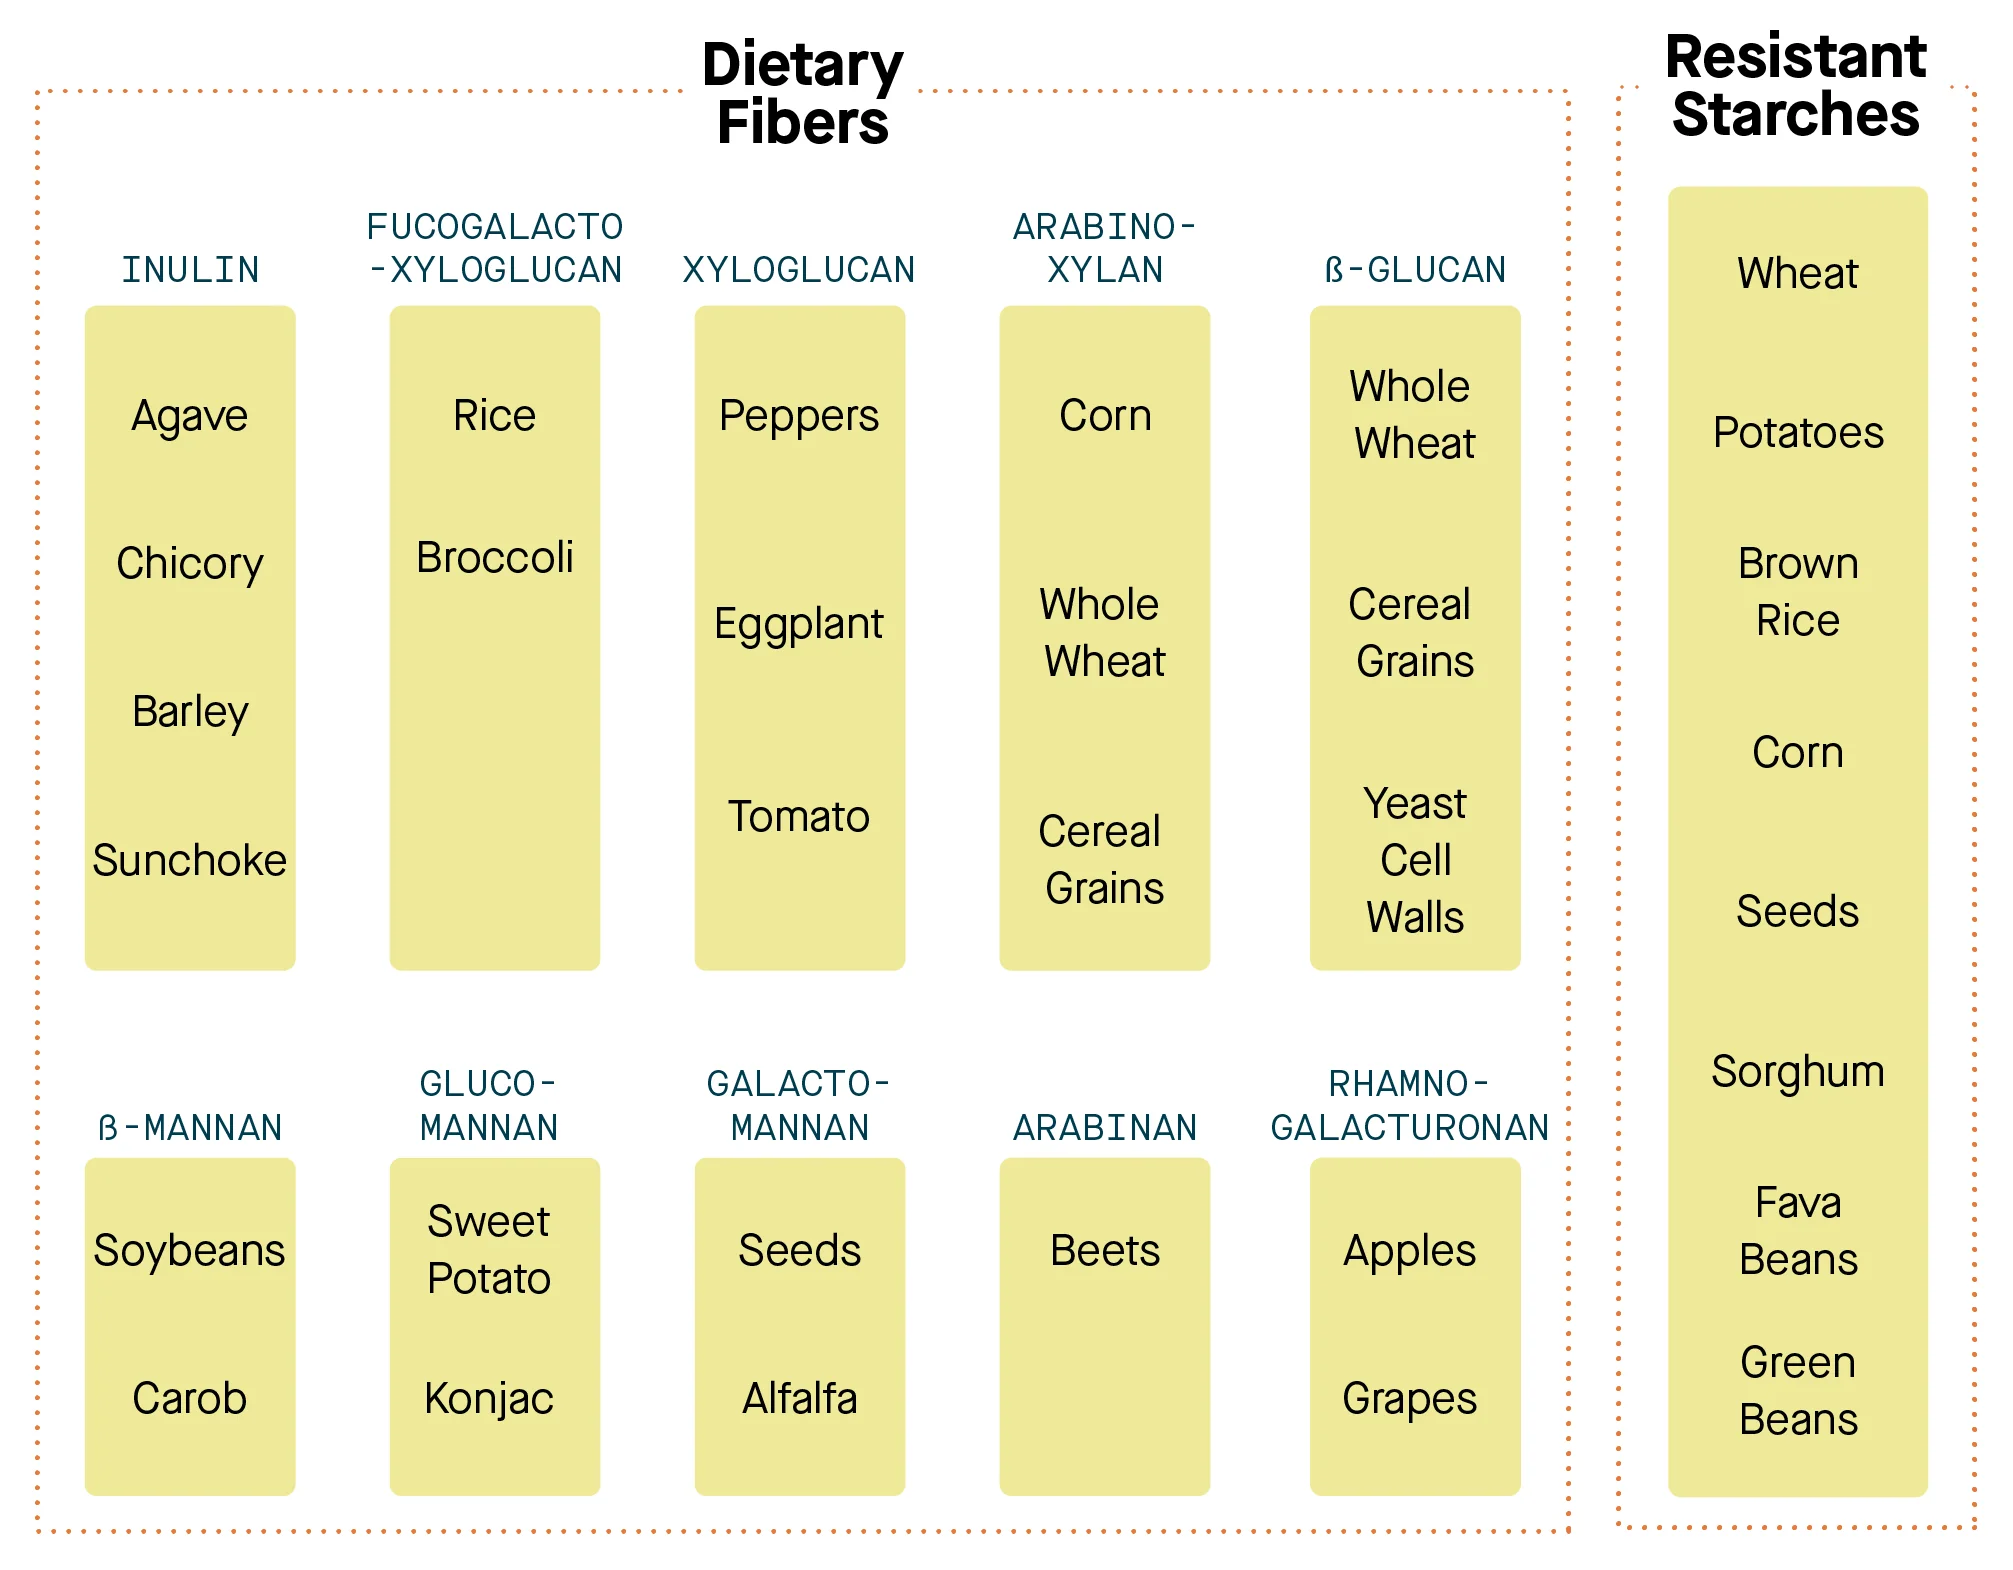 A chart of fibers and starches